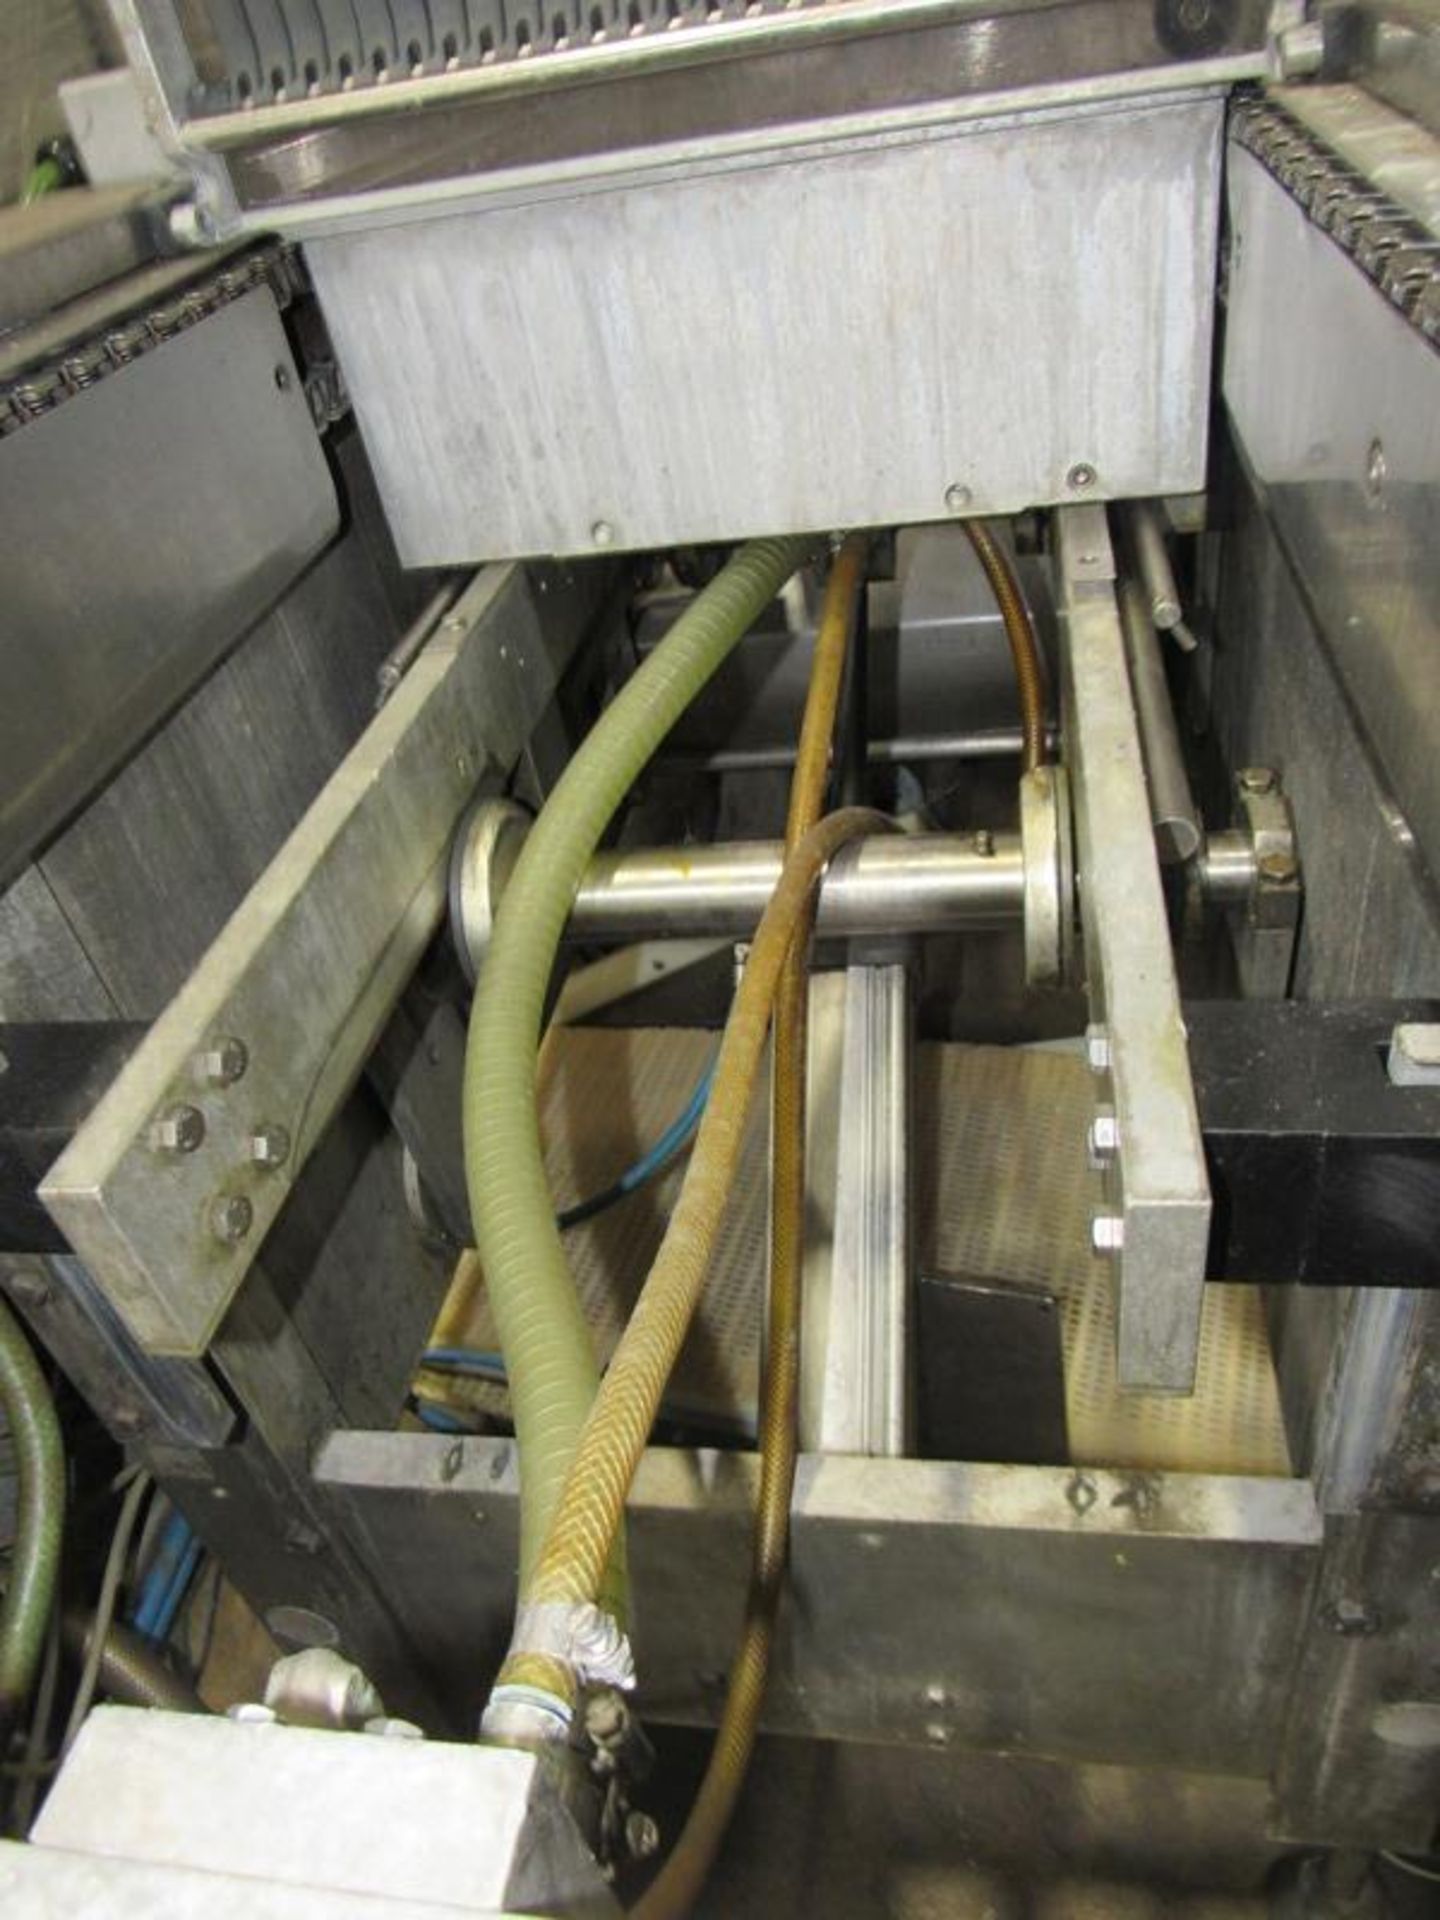 Multivac Rollstock Thermoformer Packaging Machine, 16 5/8" between chains, approx. 13 1/2" - Image 5 of 25